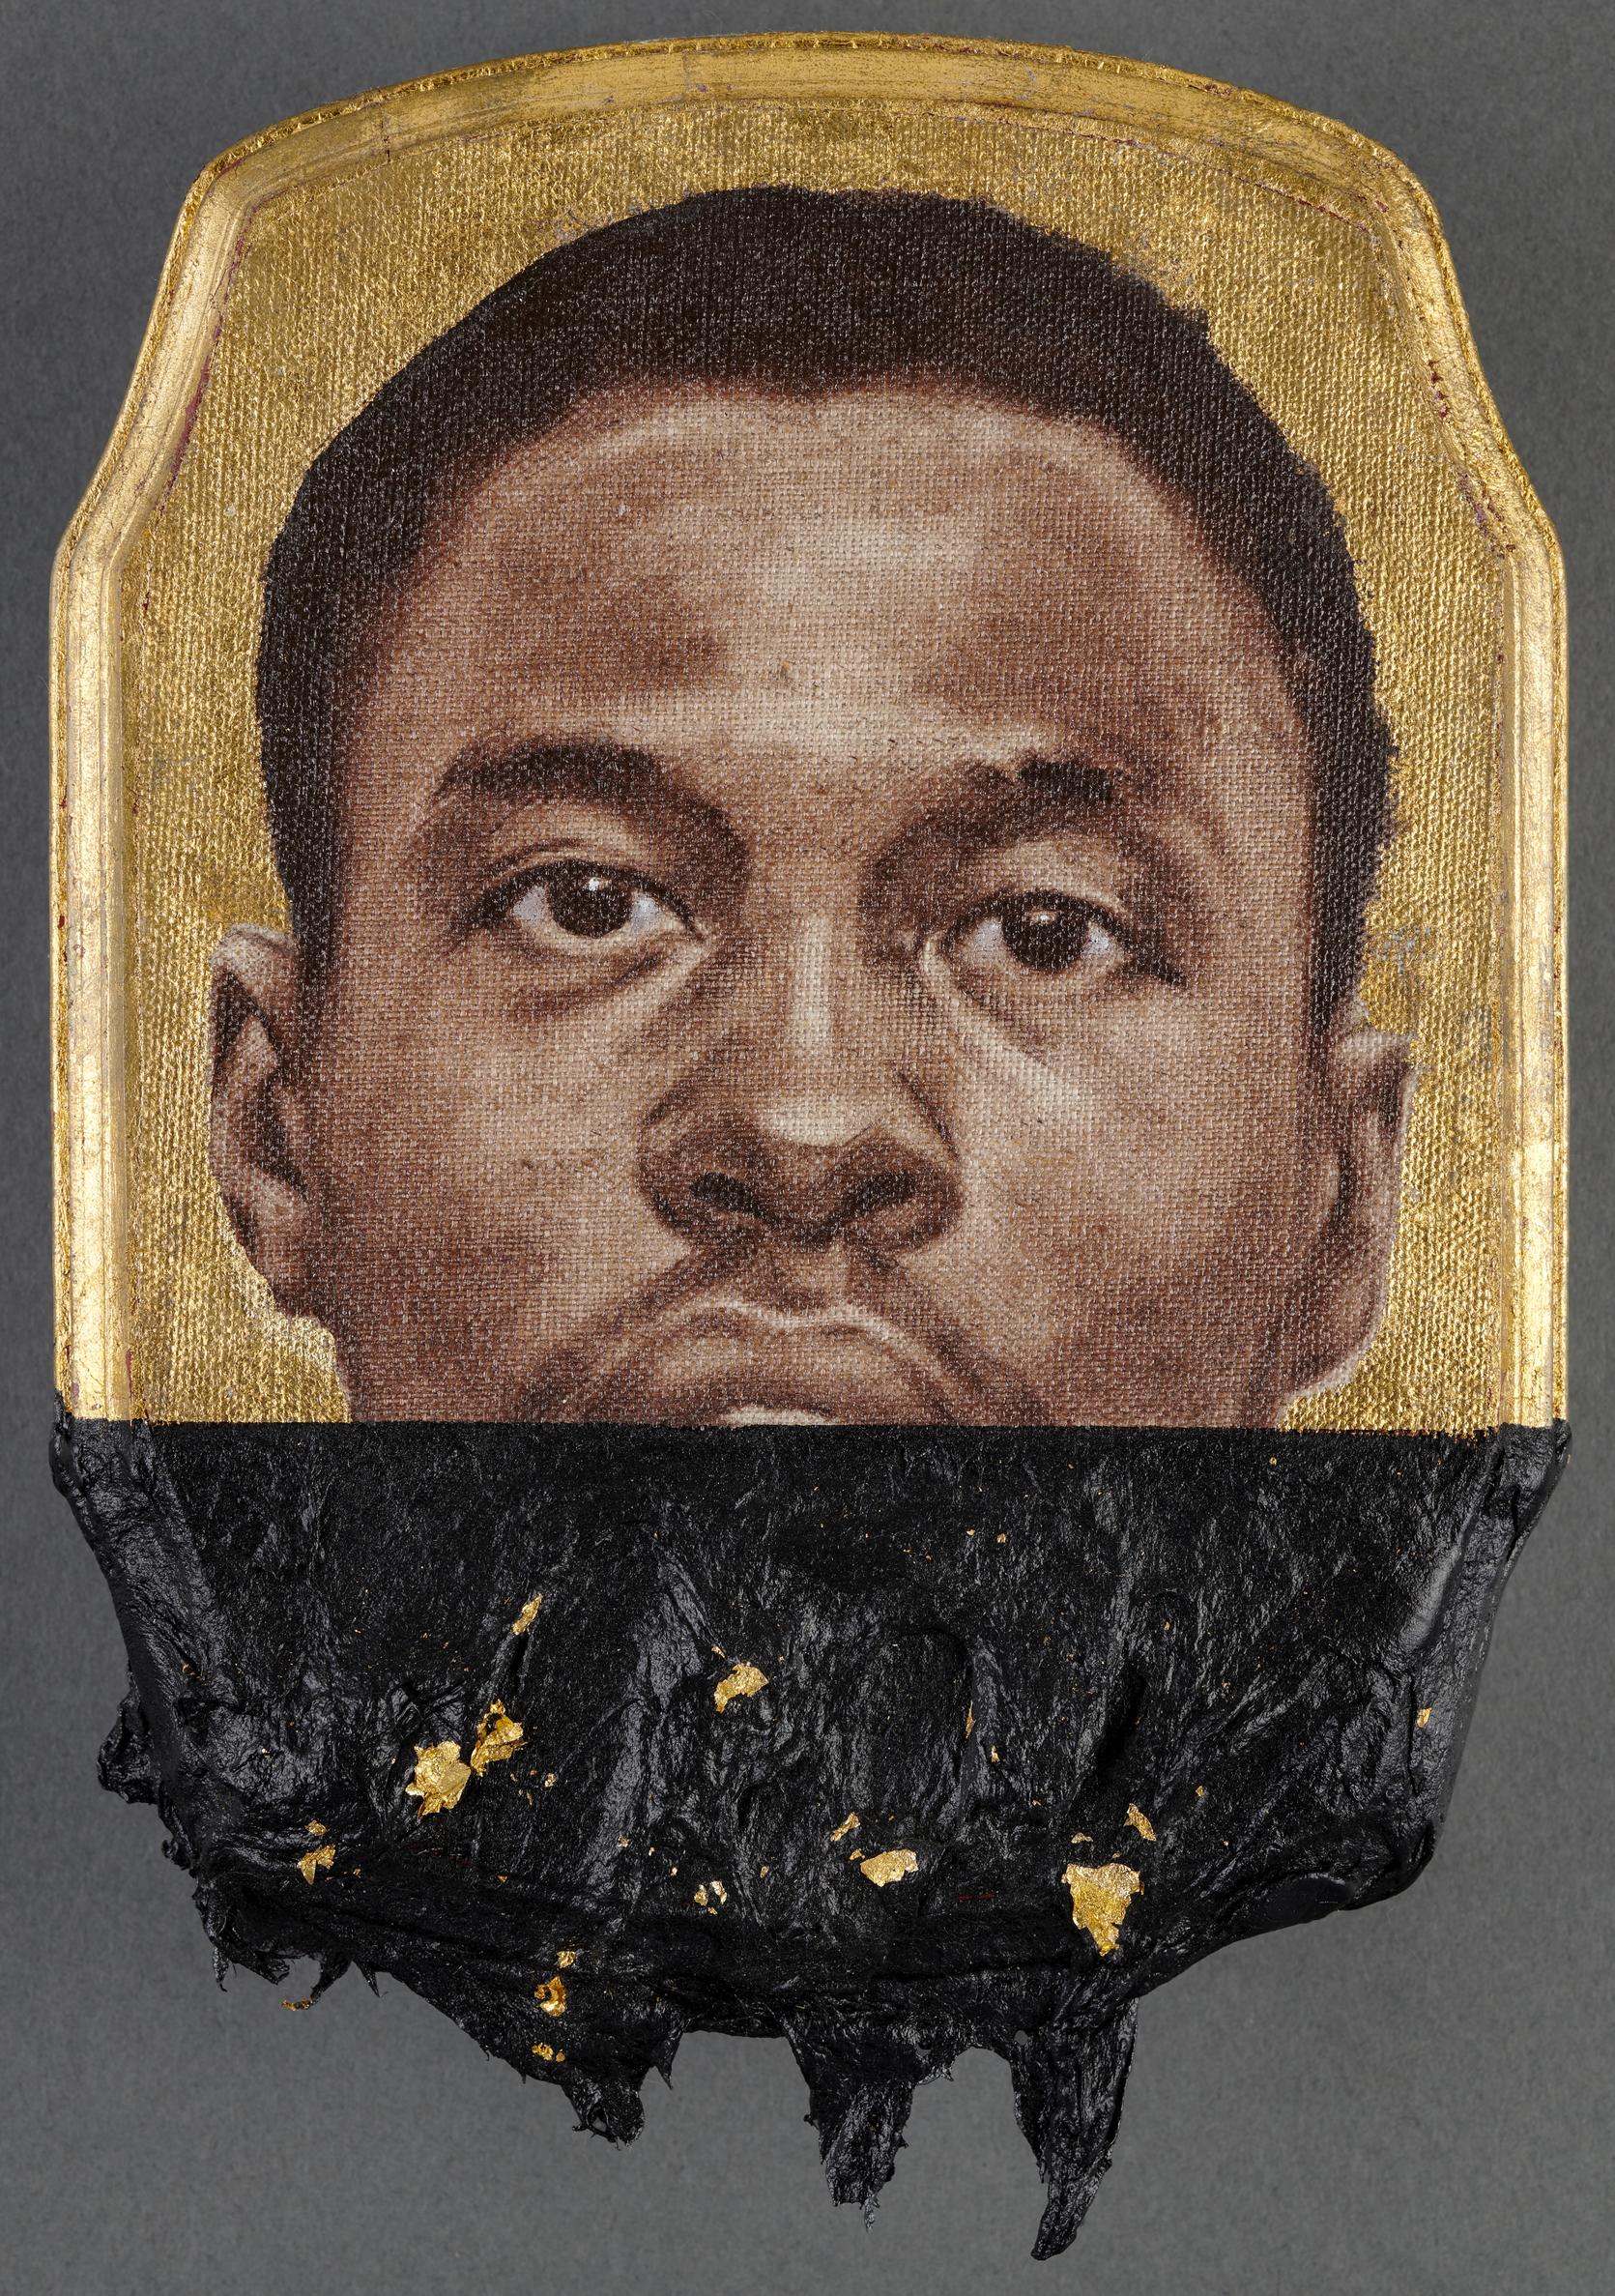 Titus Kaphar, Jerome XVIII, 2014. Oil, tar, and gold leaf on panel. 25.4 x 17.8 x 2.5 cm (10 x 7 x 1 in.). Collection of Stacey Fabrikant. 